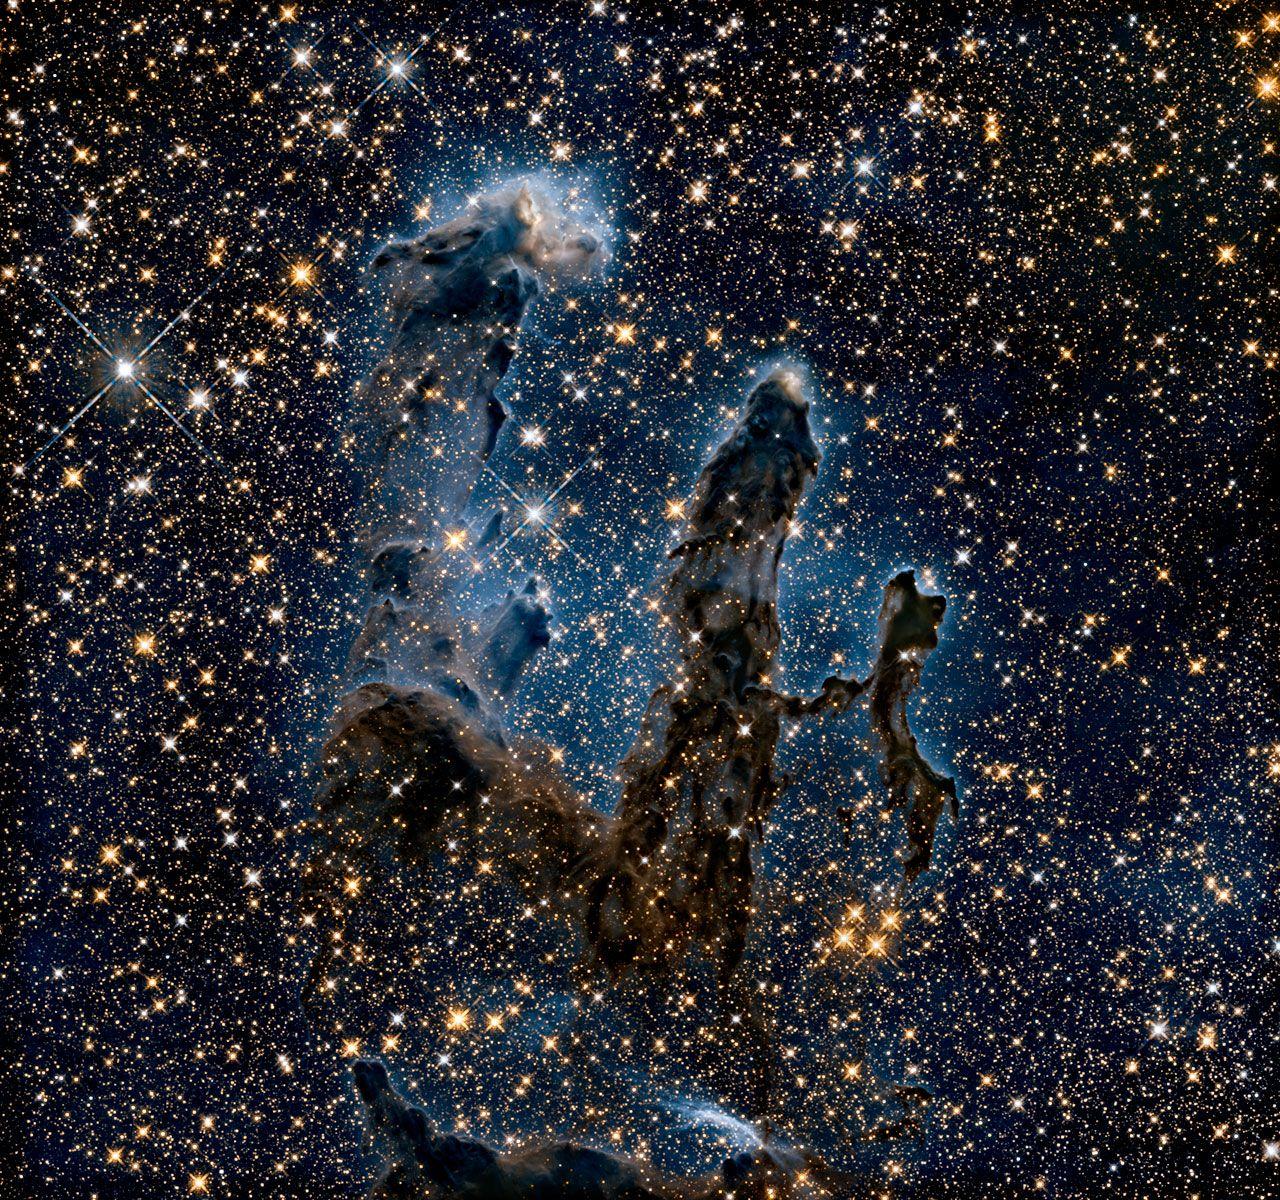 New View Of The Pillars Of Creation